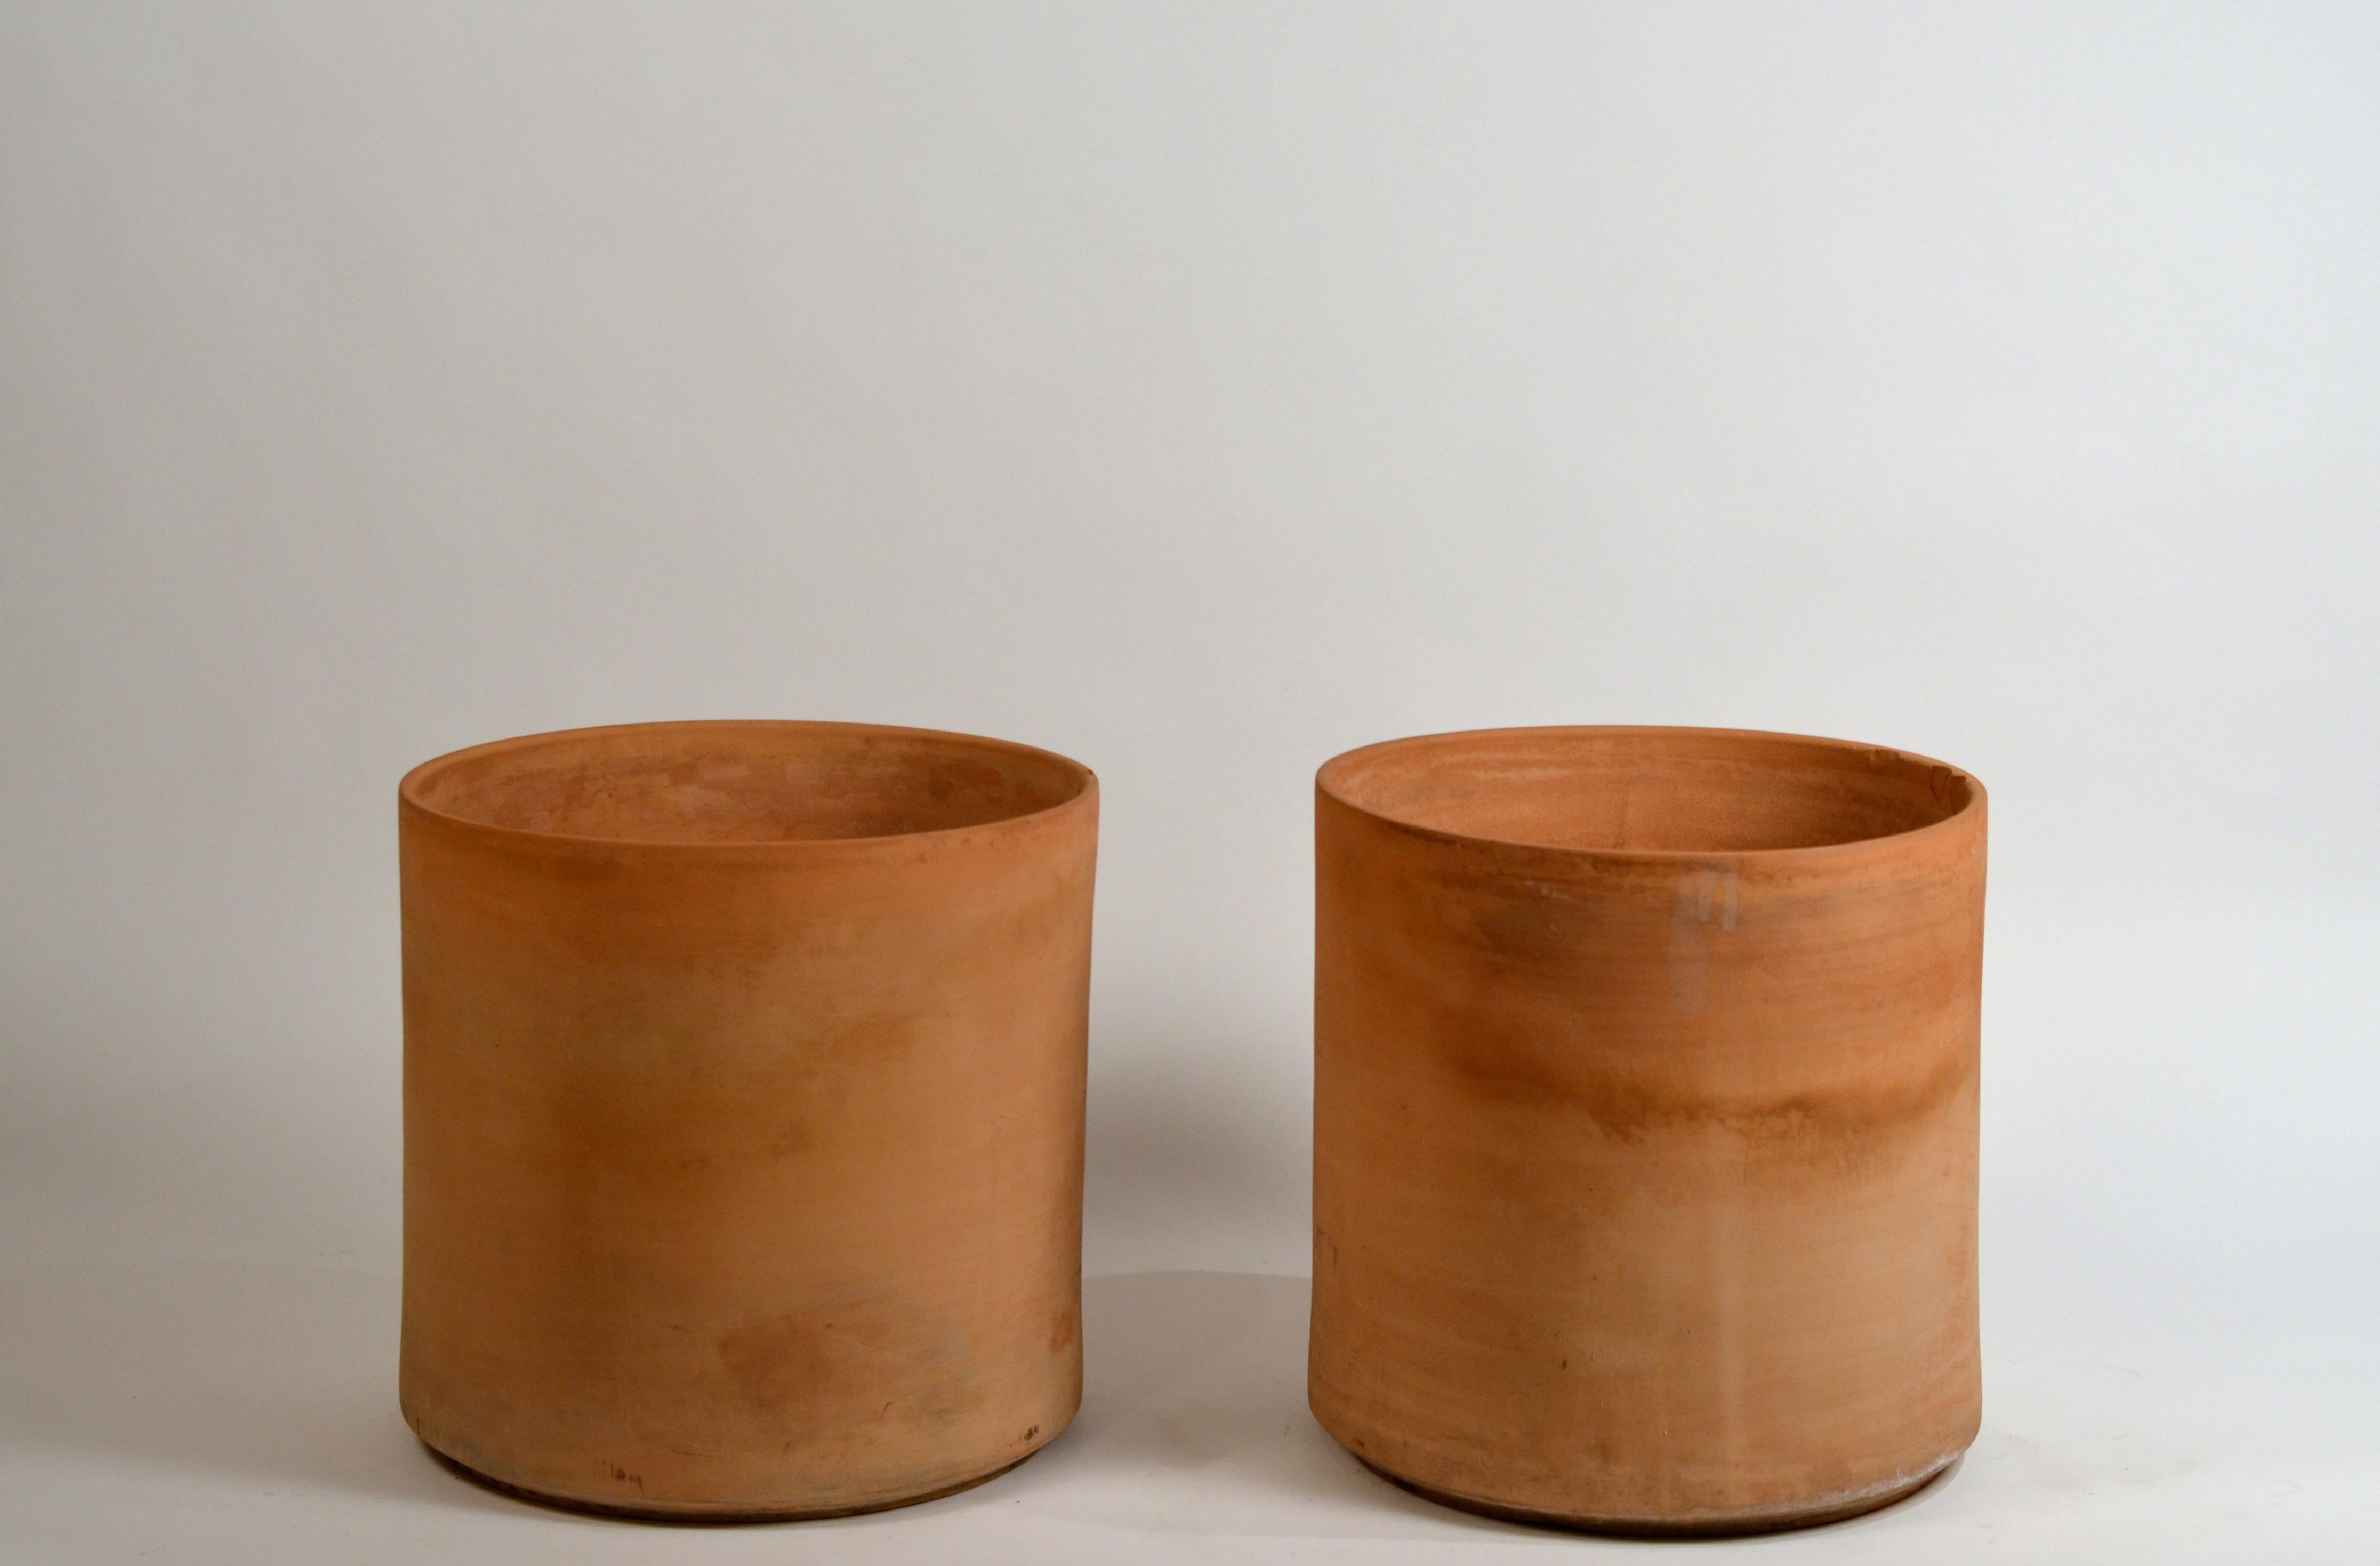 Pair of huge unglazed architectural terracotta planters by Gainey Ceramics.

Rare as a pair in that size with the unglazed finish.

Signed: Gainey Ceramics - La Verne, Calif.